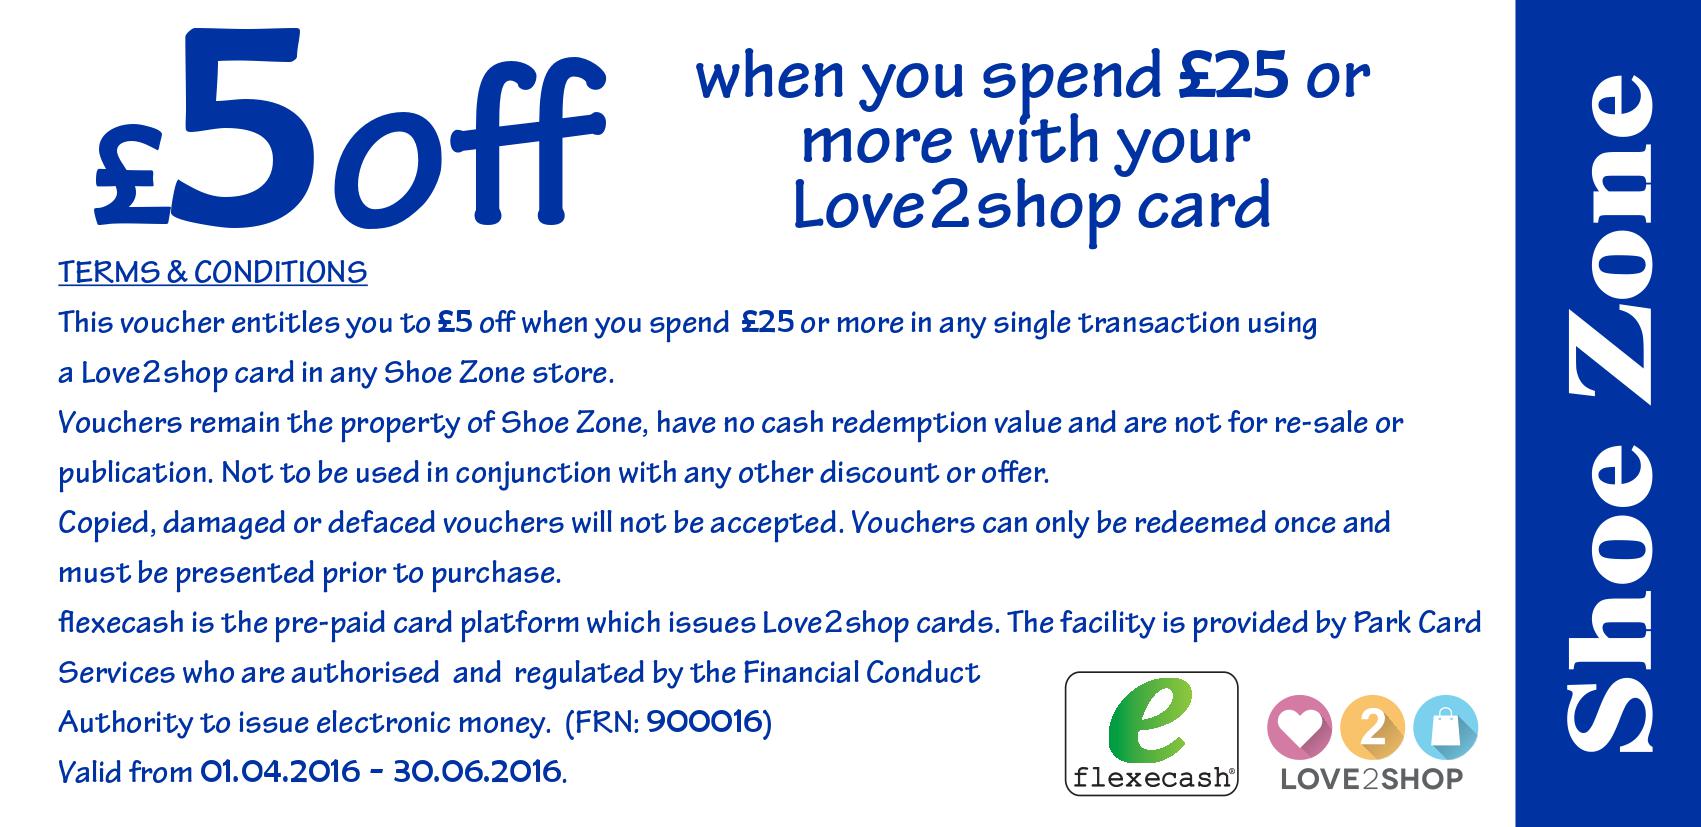 £5 off at Shoe Zone with your Love2shop flexecash Card | Love2shop Offers